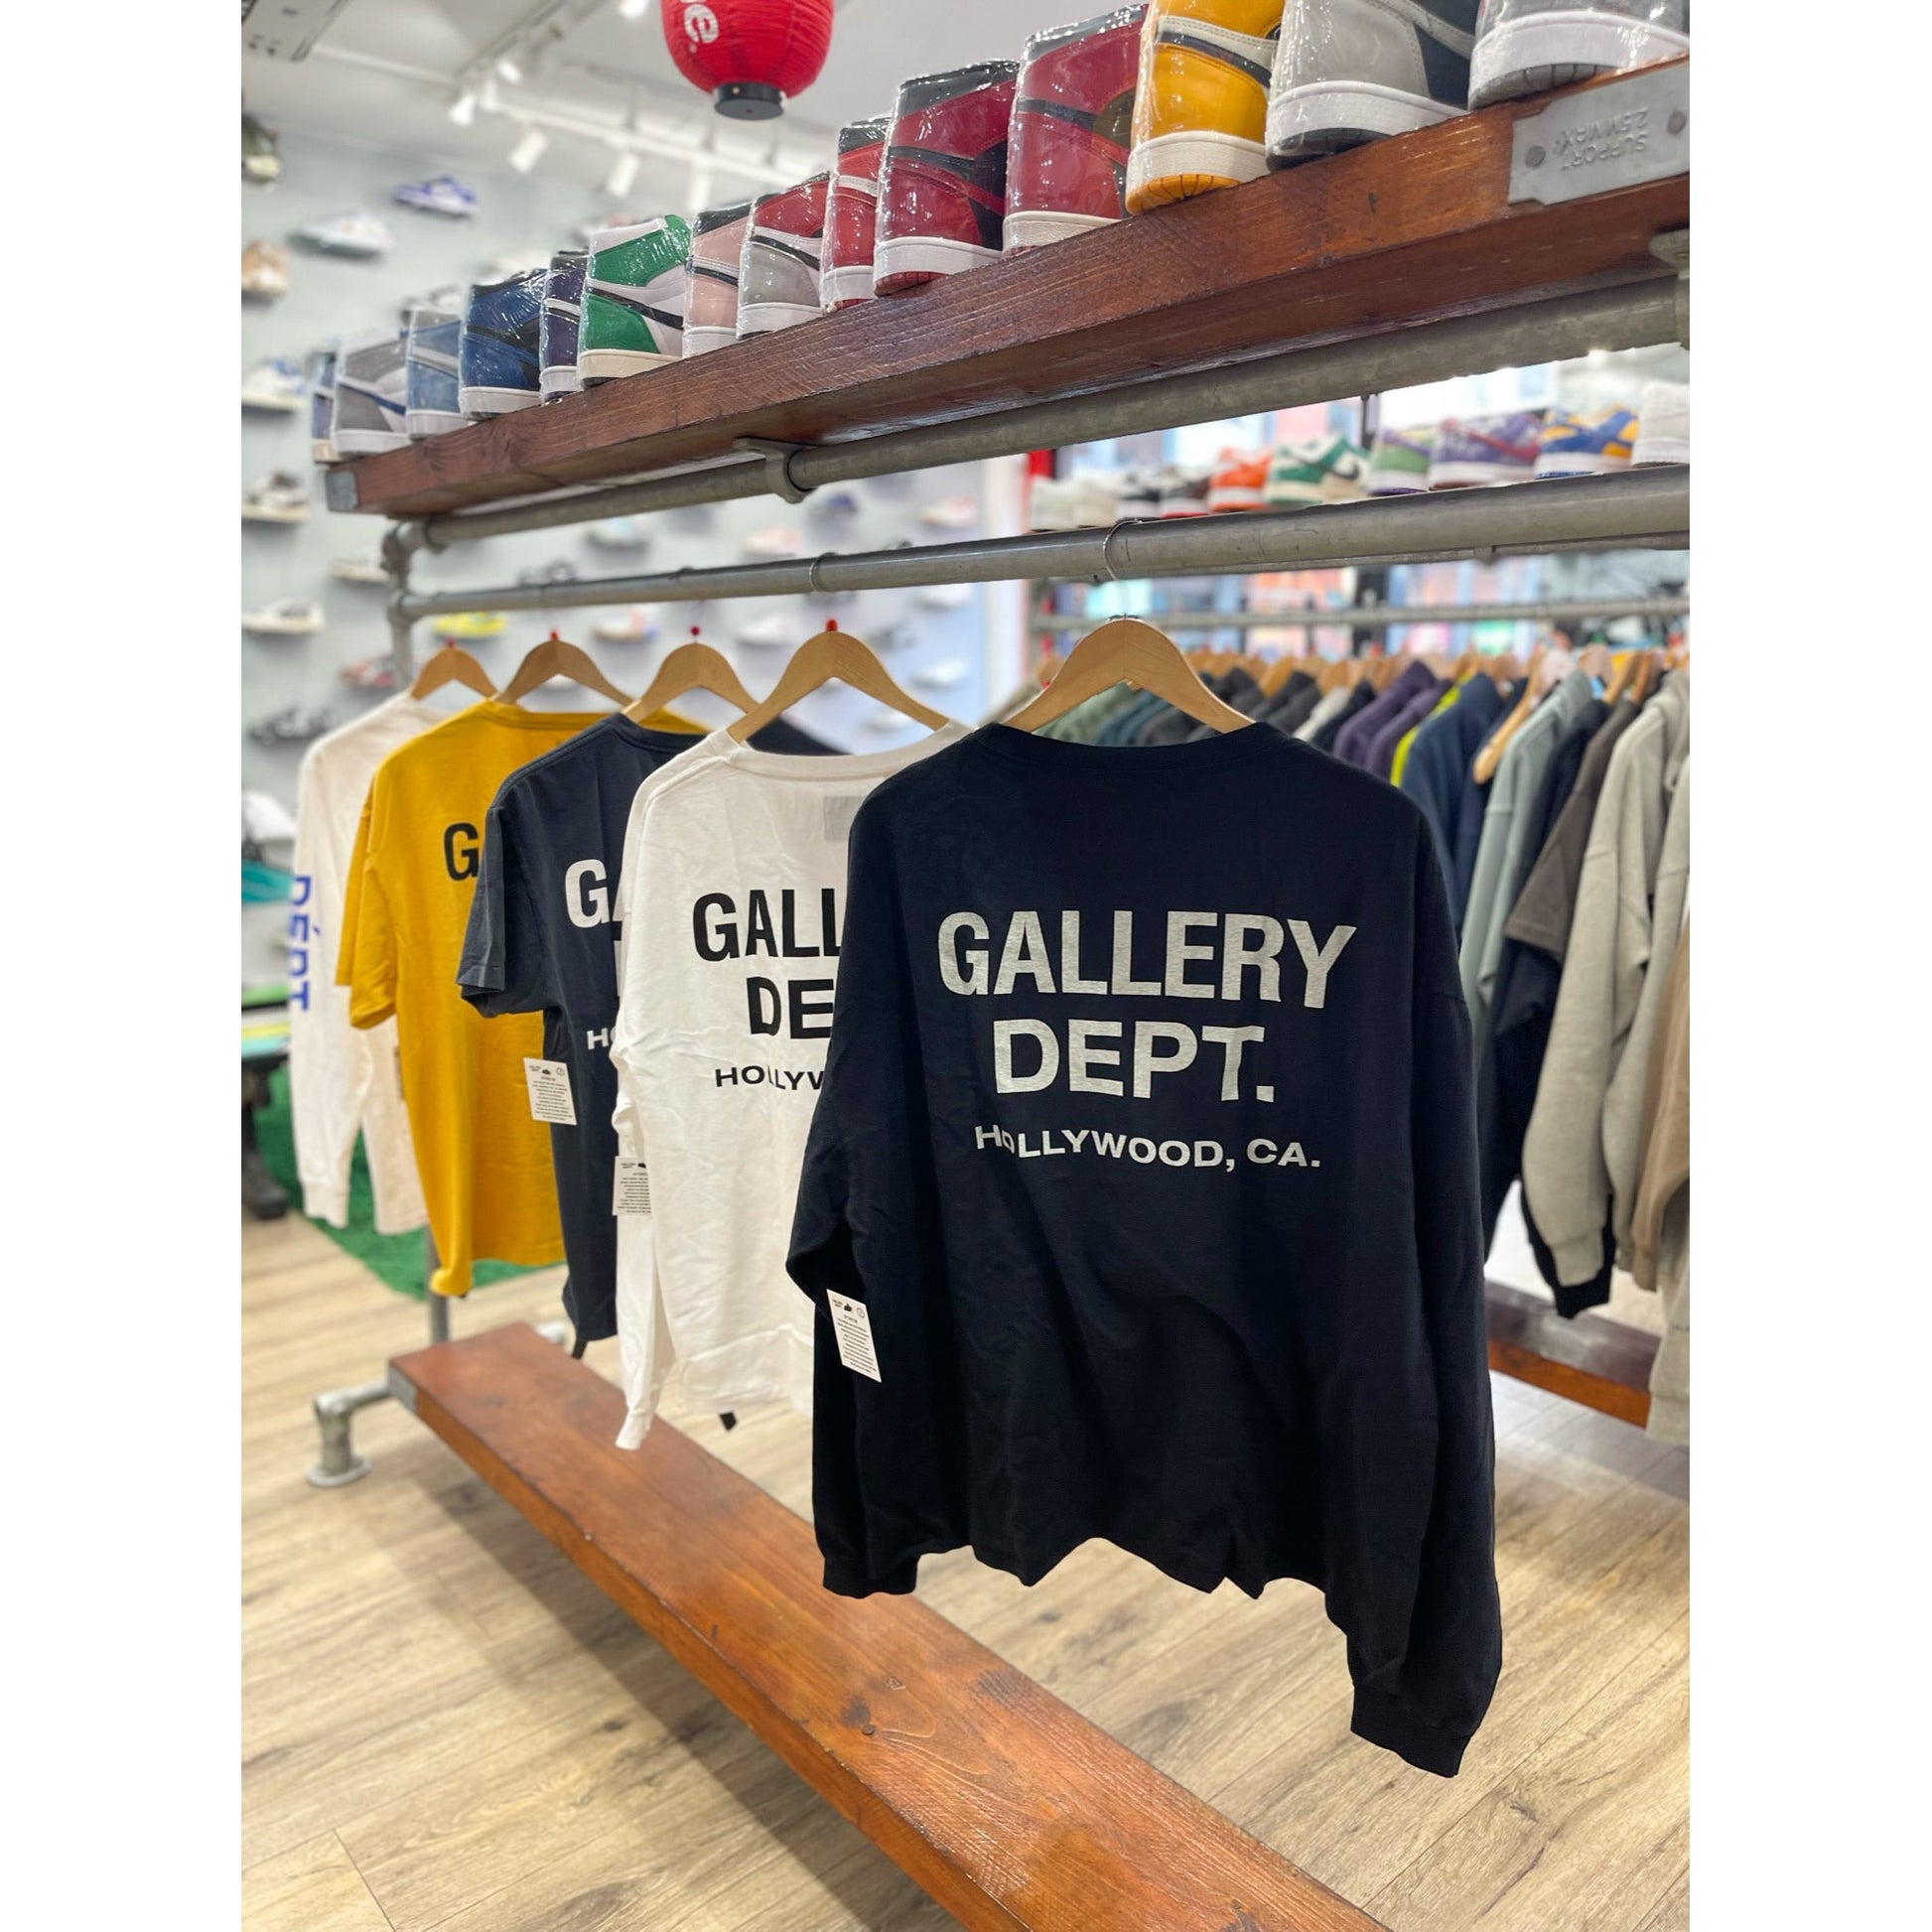 Gallery Dept. Souvenir L/S T-Shirt Black by GALLERY DEPT. from £250.00